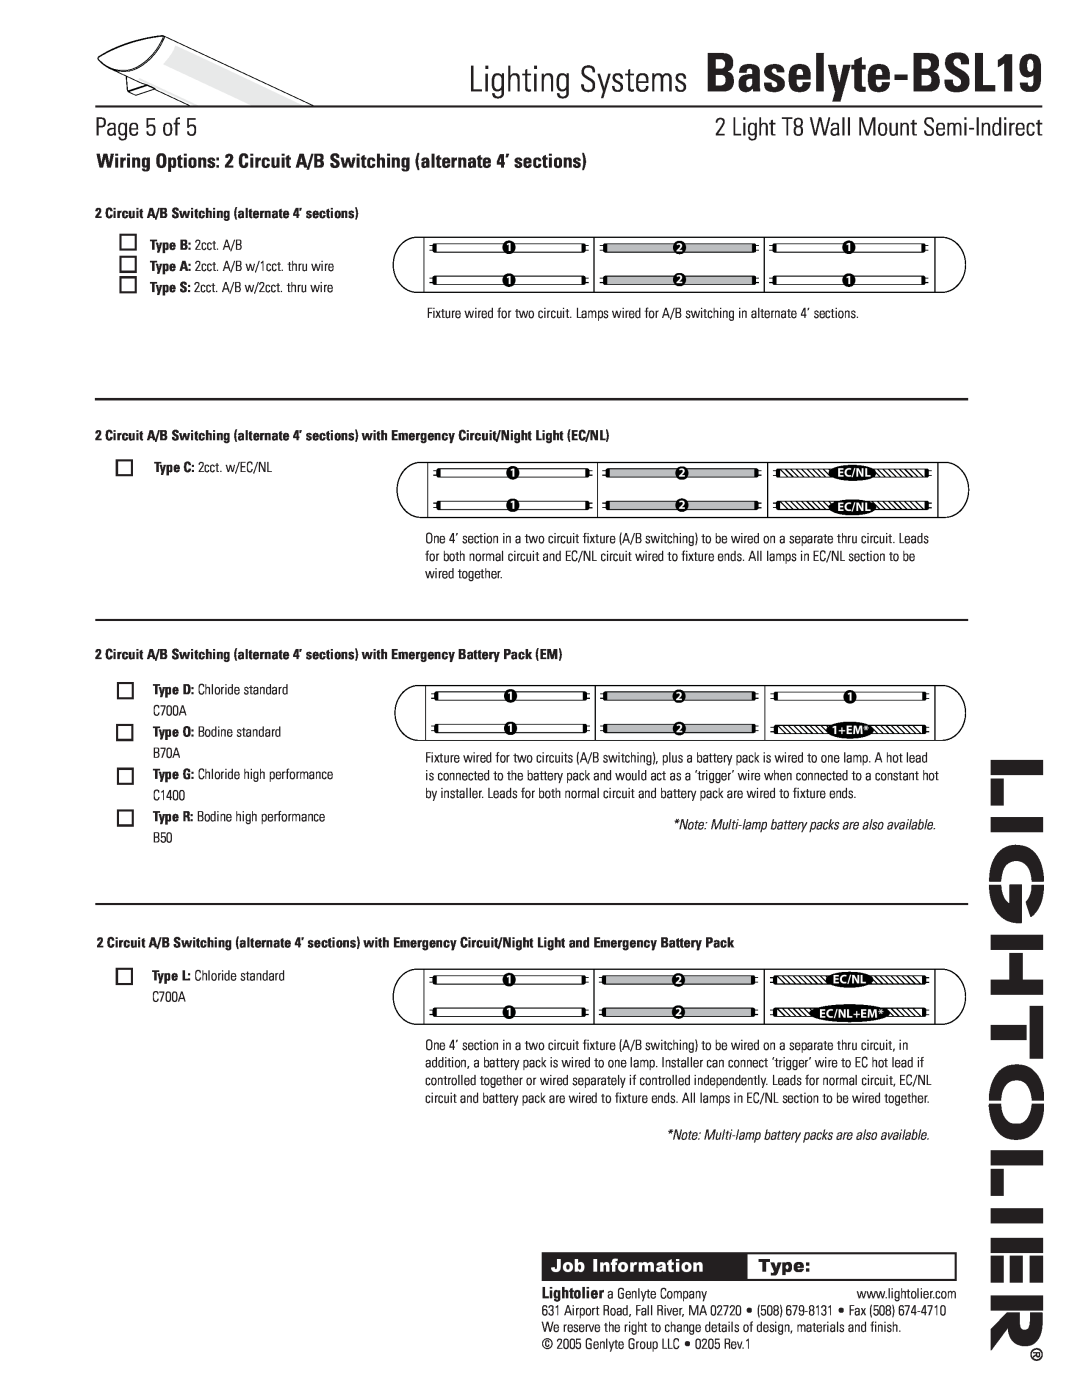 Lightolier Baselyte-BSL19 specifications Circuit A/B Switching alternate 4’ sections, Type O Bodine standard B70A, Page of 